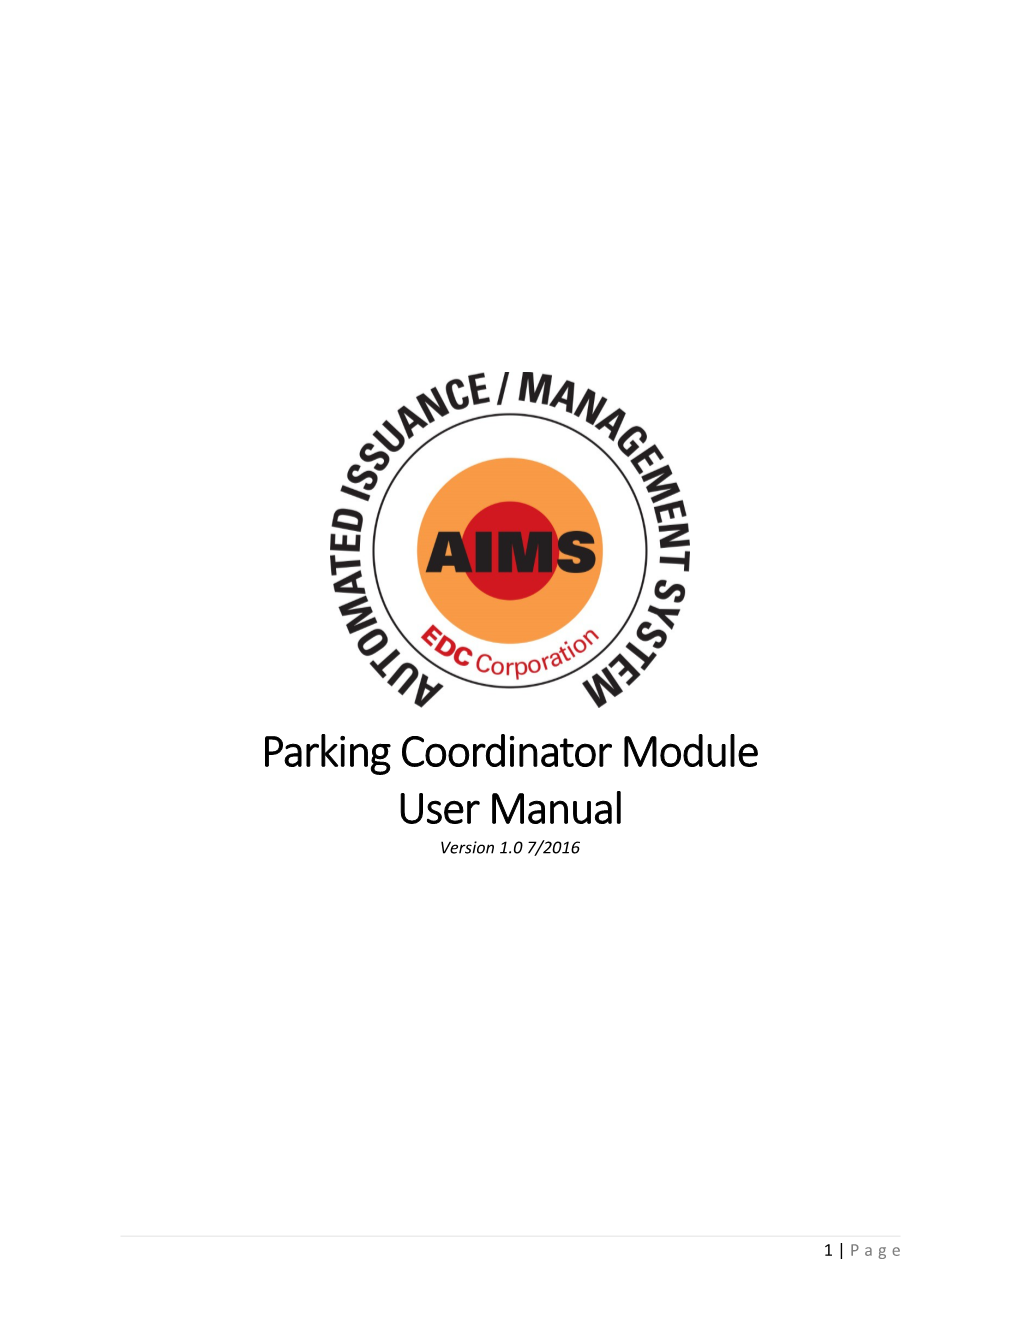 5.1 How to Login to the Parking Coordinator Module (Figure 1)